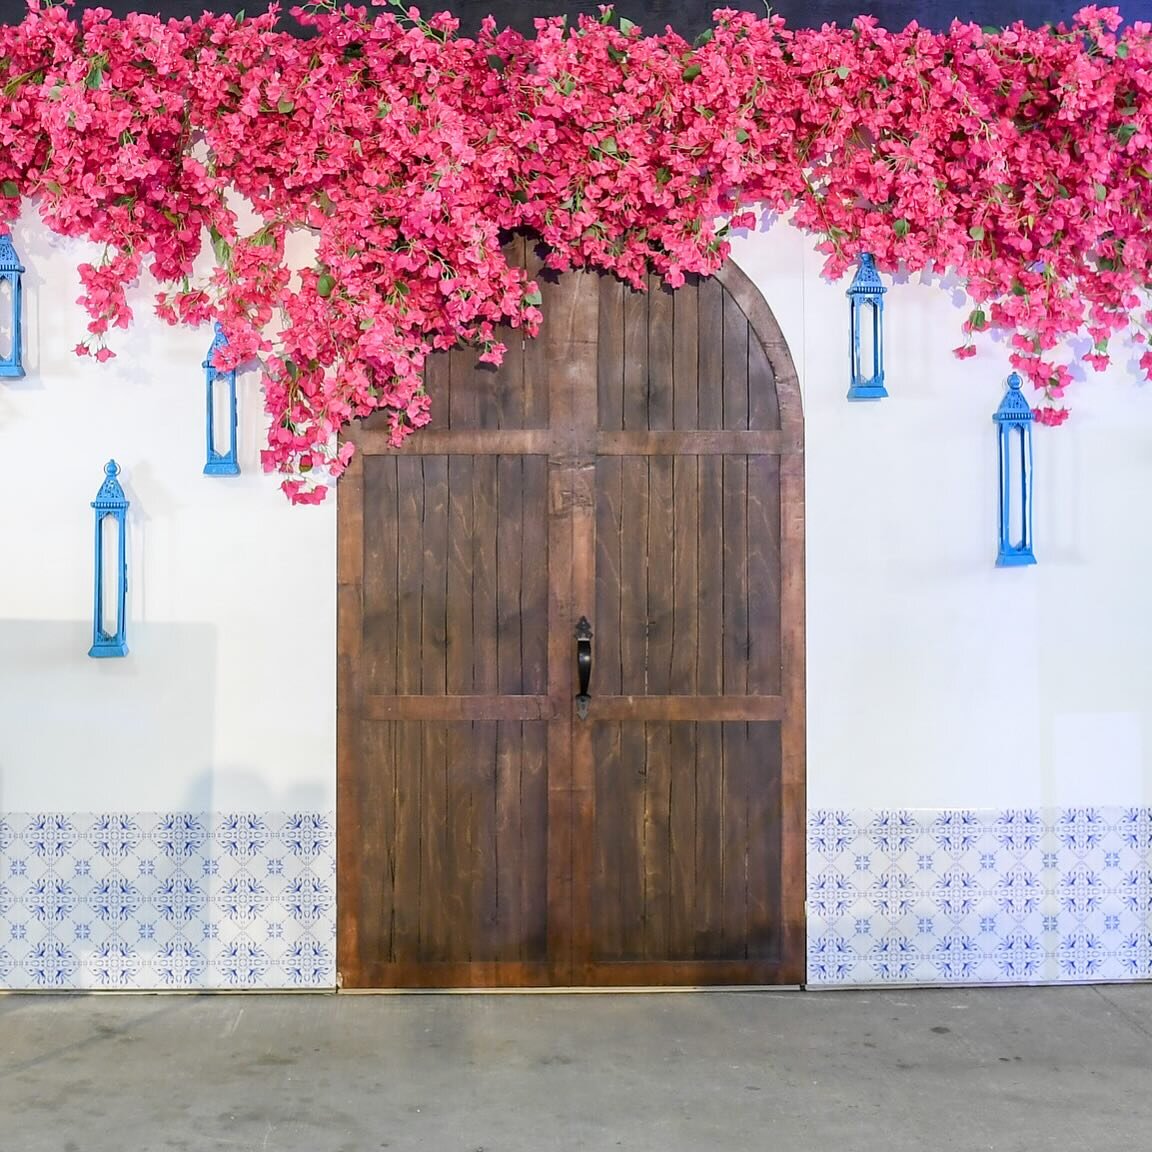 Scrubs In The City Mykonos Edition 🇬🇷 2023
Our Pleasure To Bring The Bursts Of Hot Pink Bougainvillea And Hues Of Blues To Capture The Essence Of The Town Of Mykonos

@evergreenbrickworksevents 

.
.
.
.
.
.
.
.
#toronto #torontolife #torontofood #